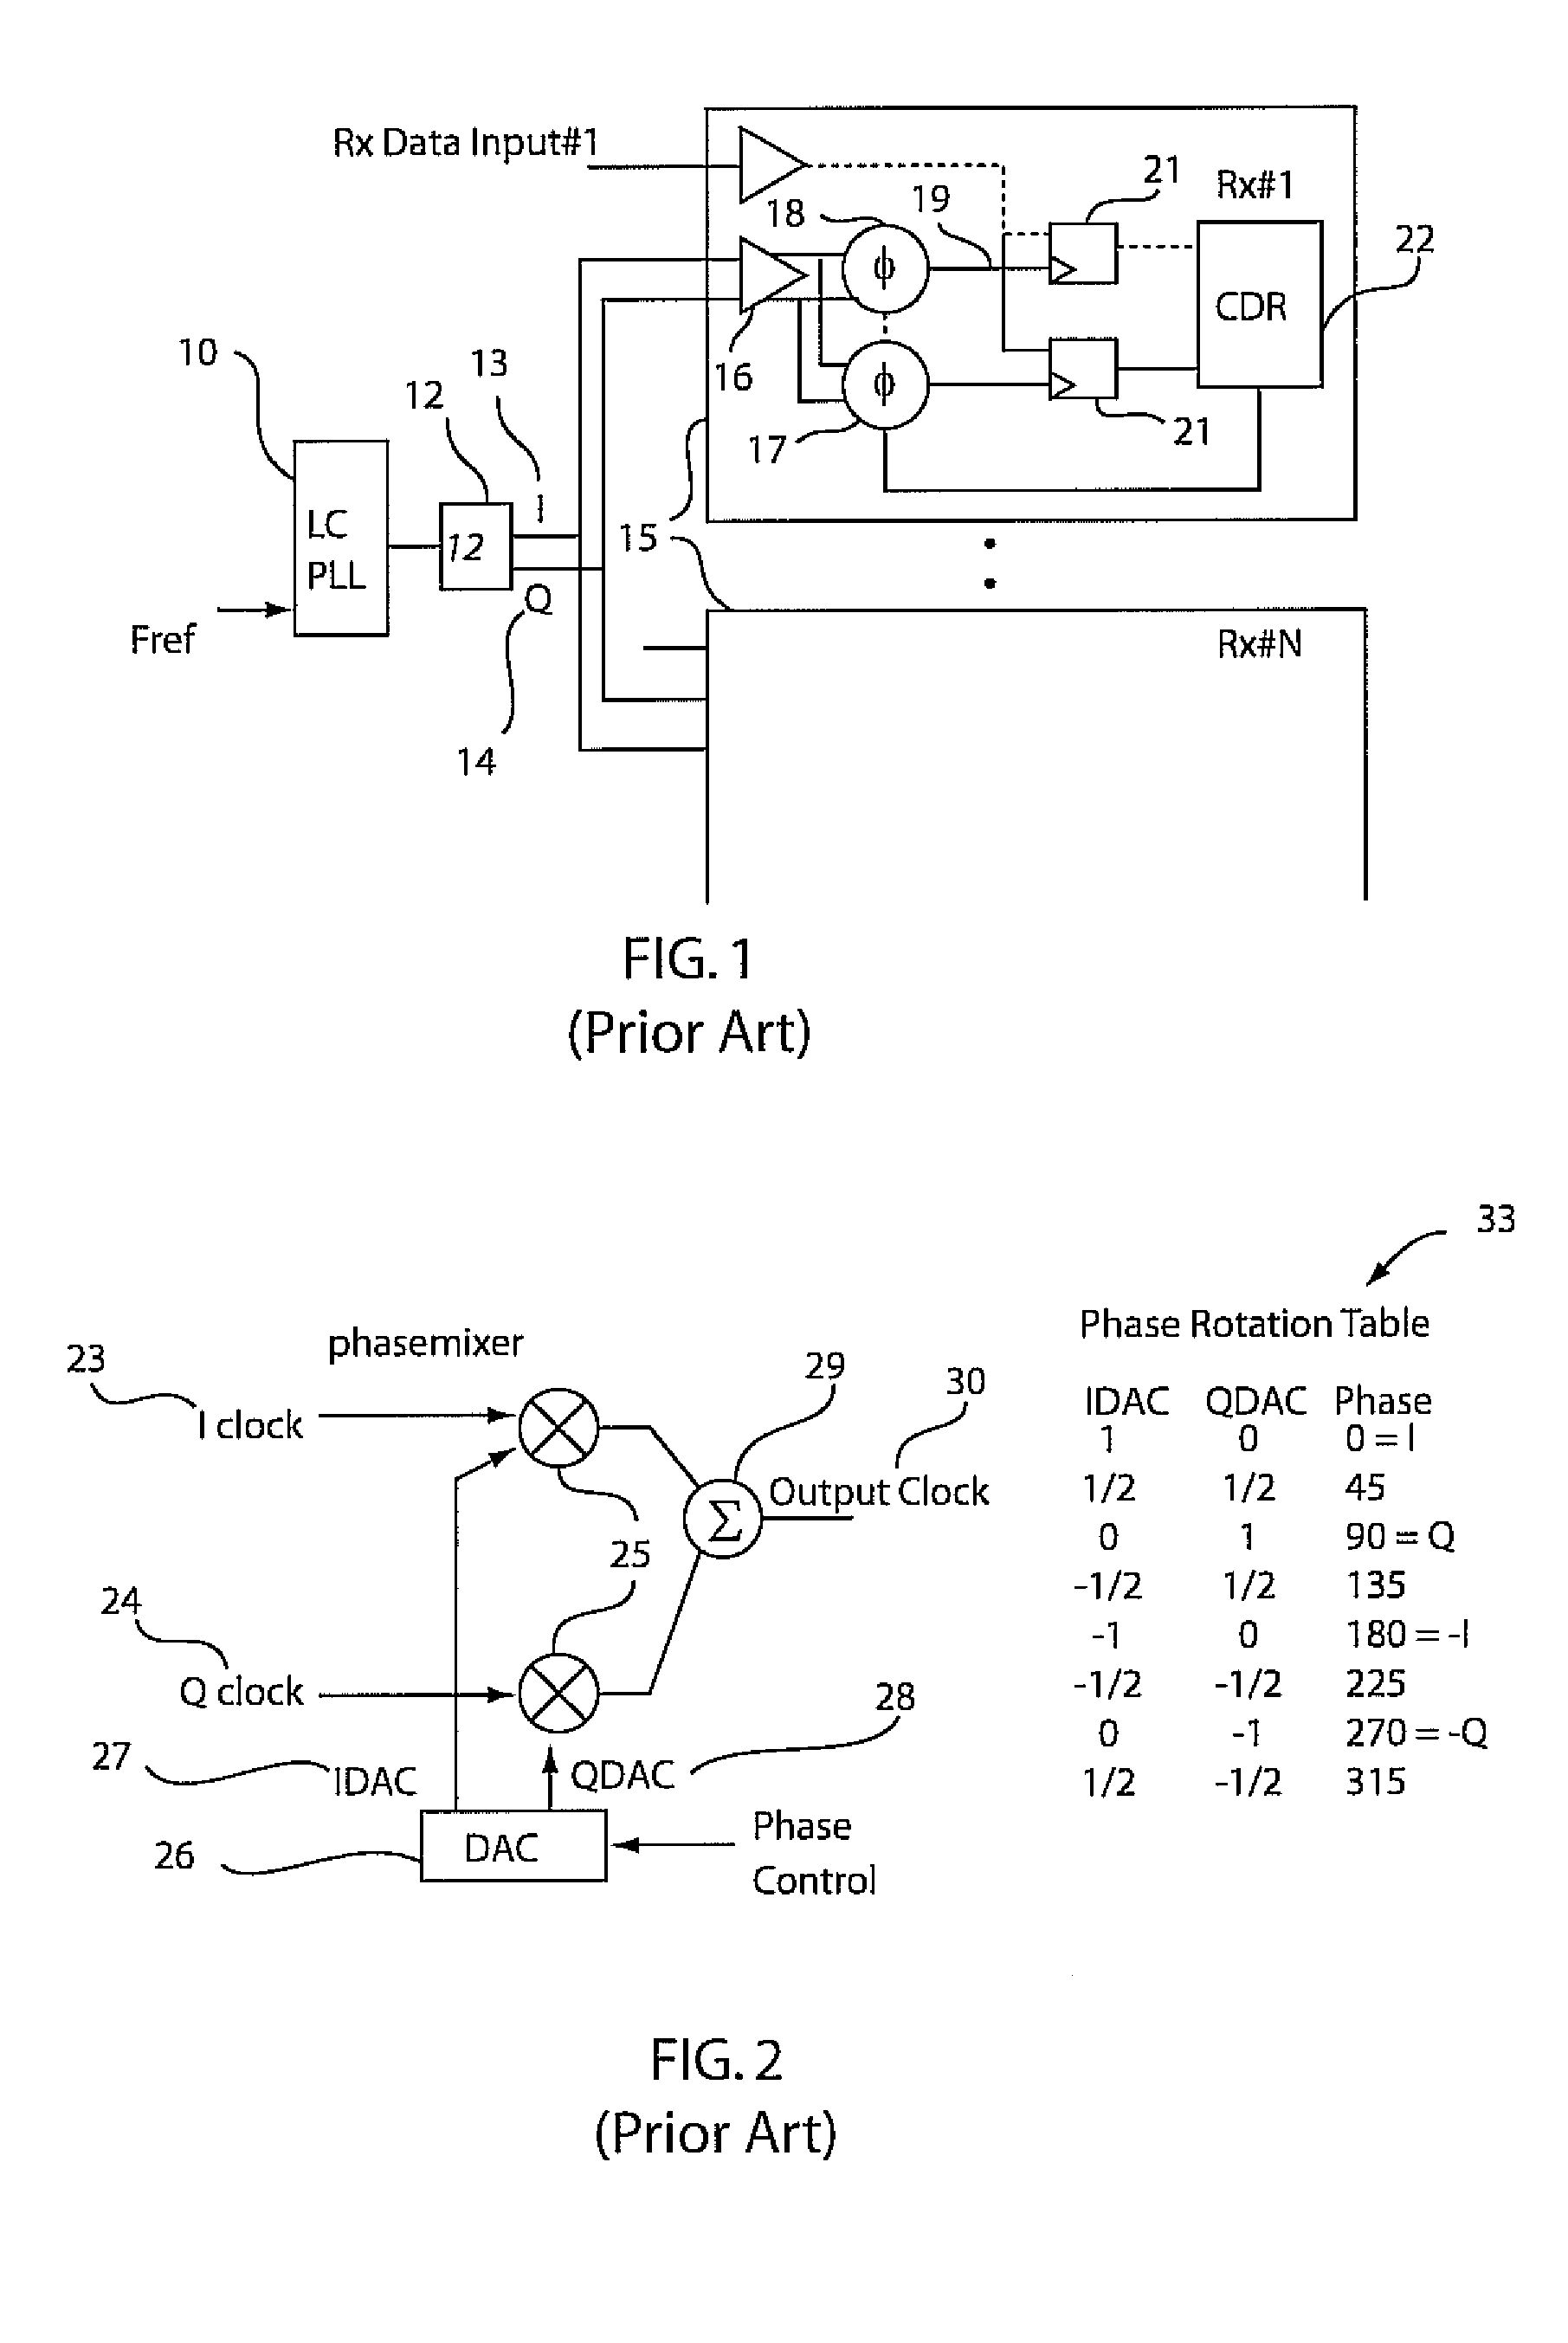 Dynamic quadrature clock correction for a phase rotator system